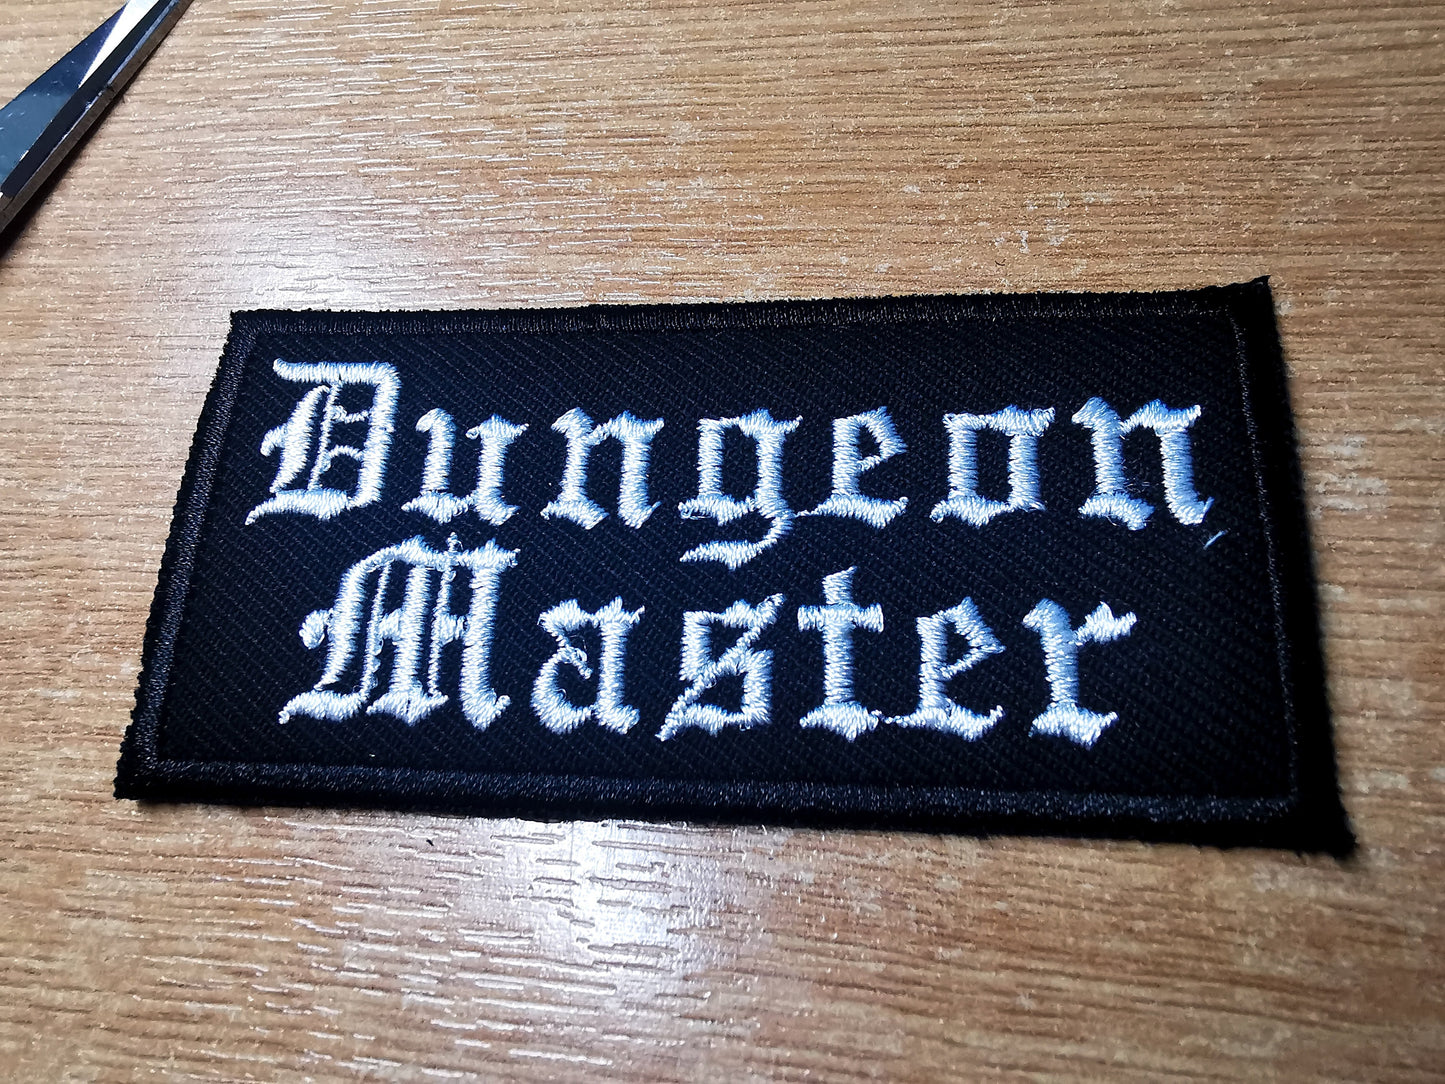 Dungeon Master RPG Patch Tabletop Dungeon Synth and Fantasy Role-Play Embroidered Iron On